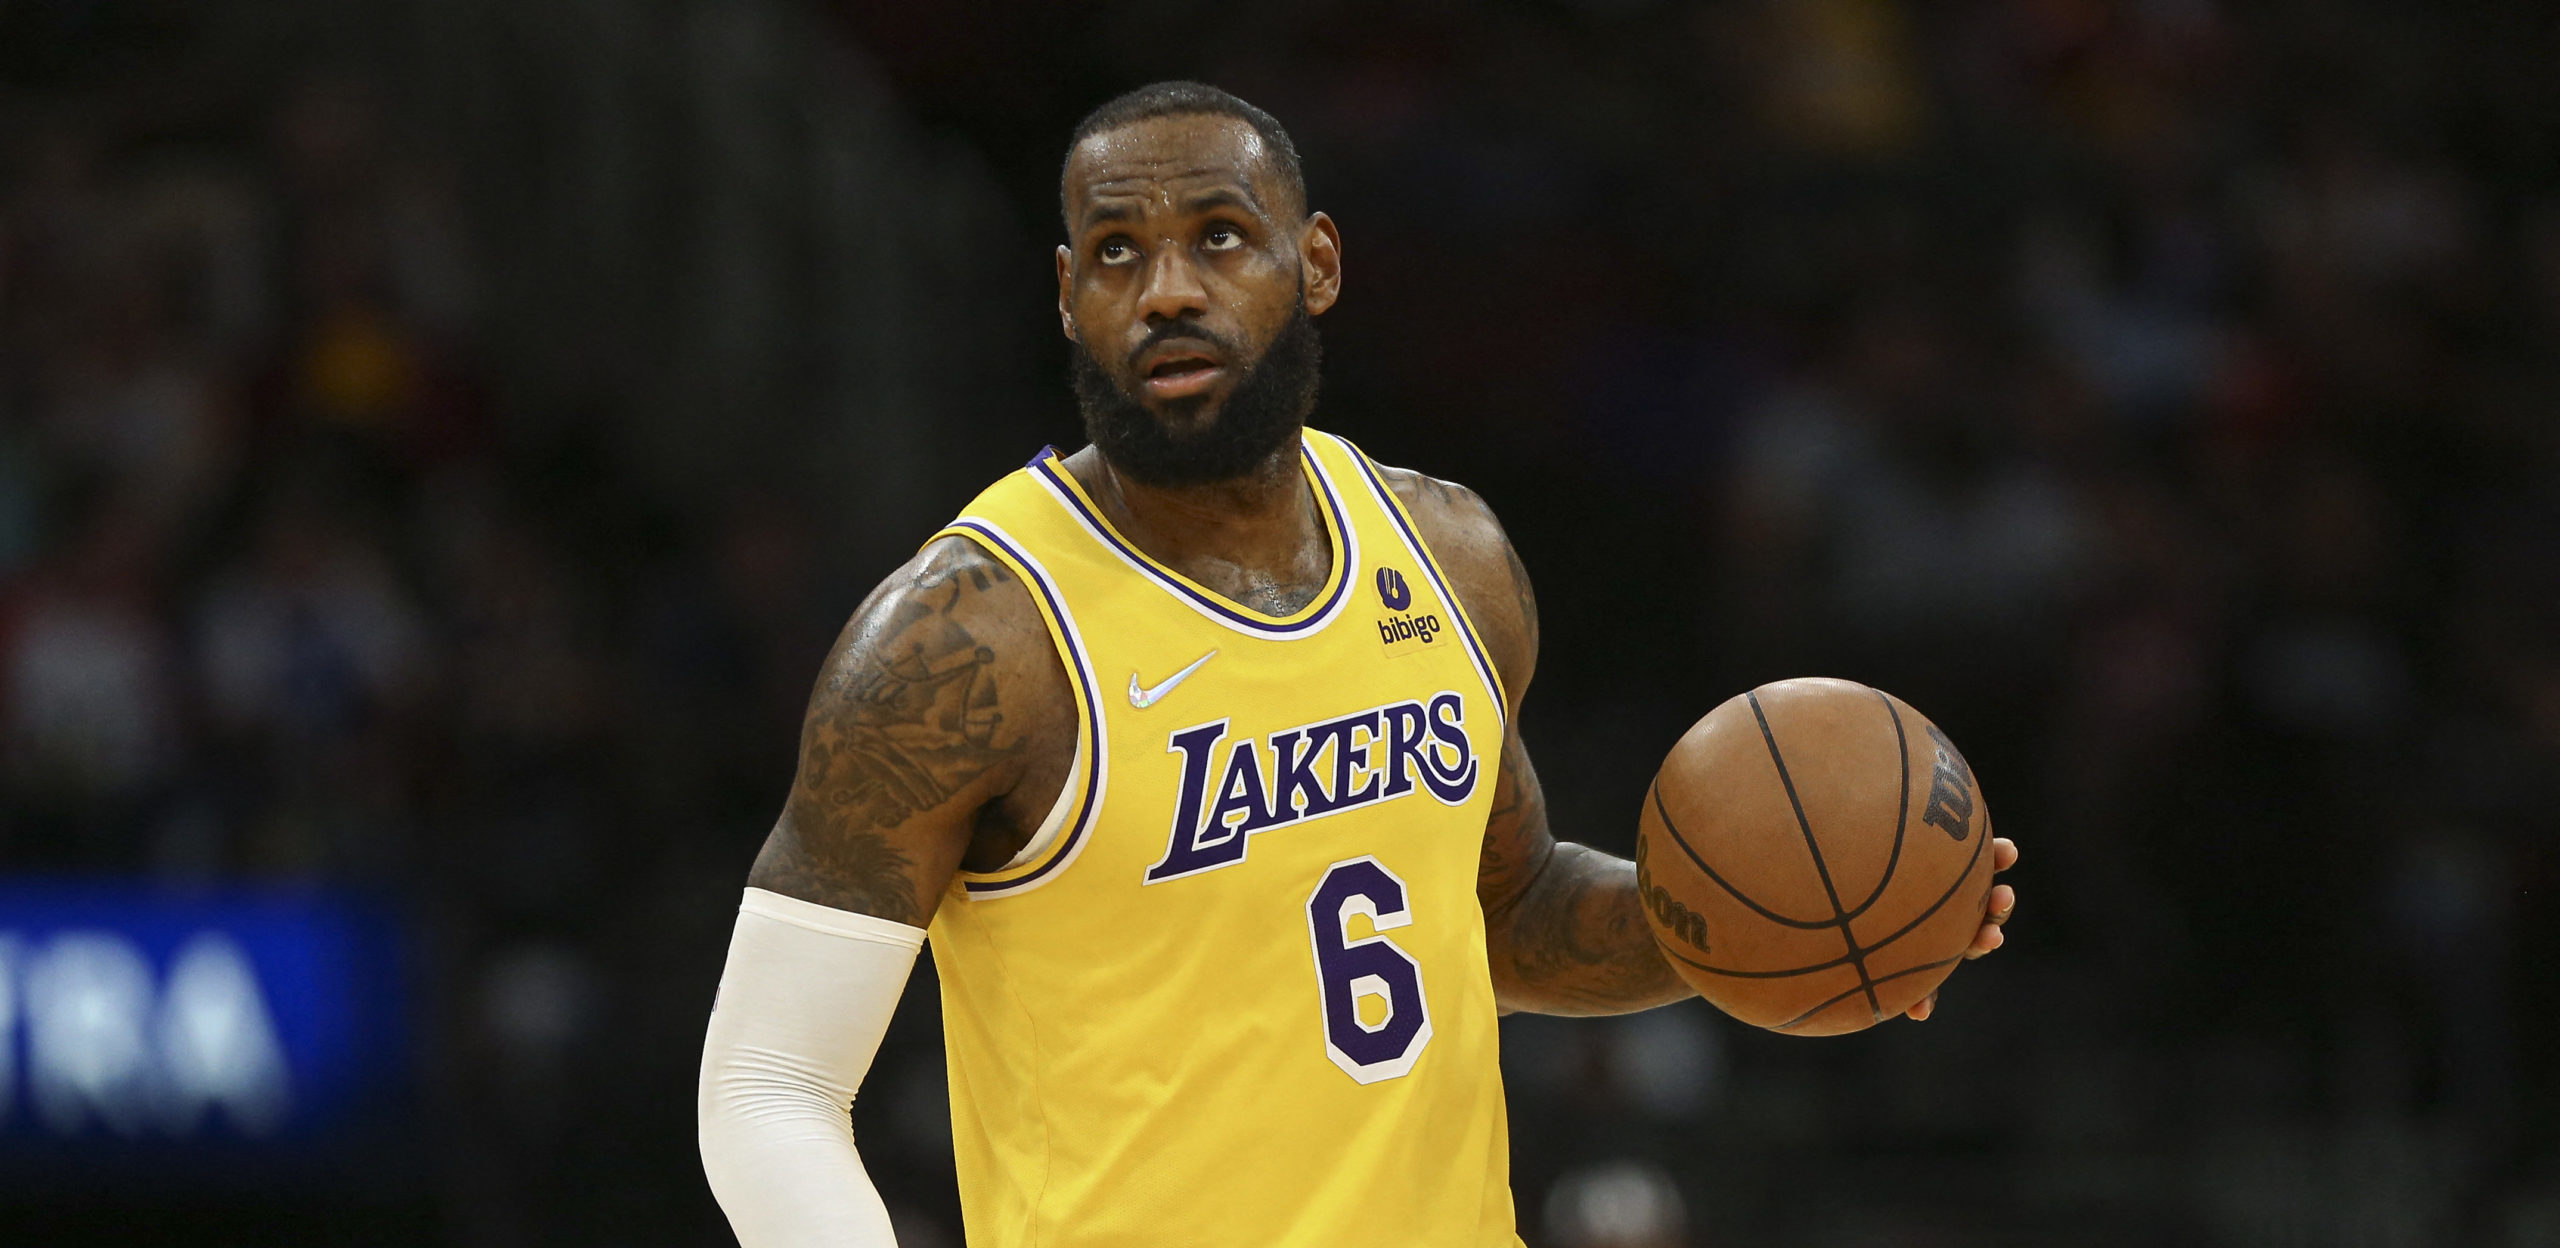 Los Angeles Lakers forward LeBron James (6) dribbles the ball during the fourth quarter against the Houston Rockets at Toyota Center.